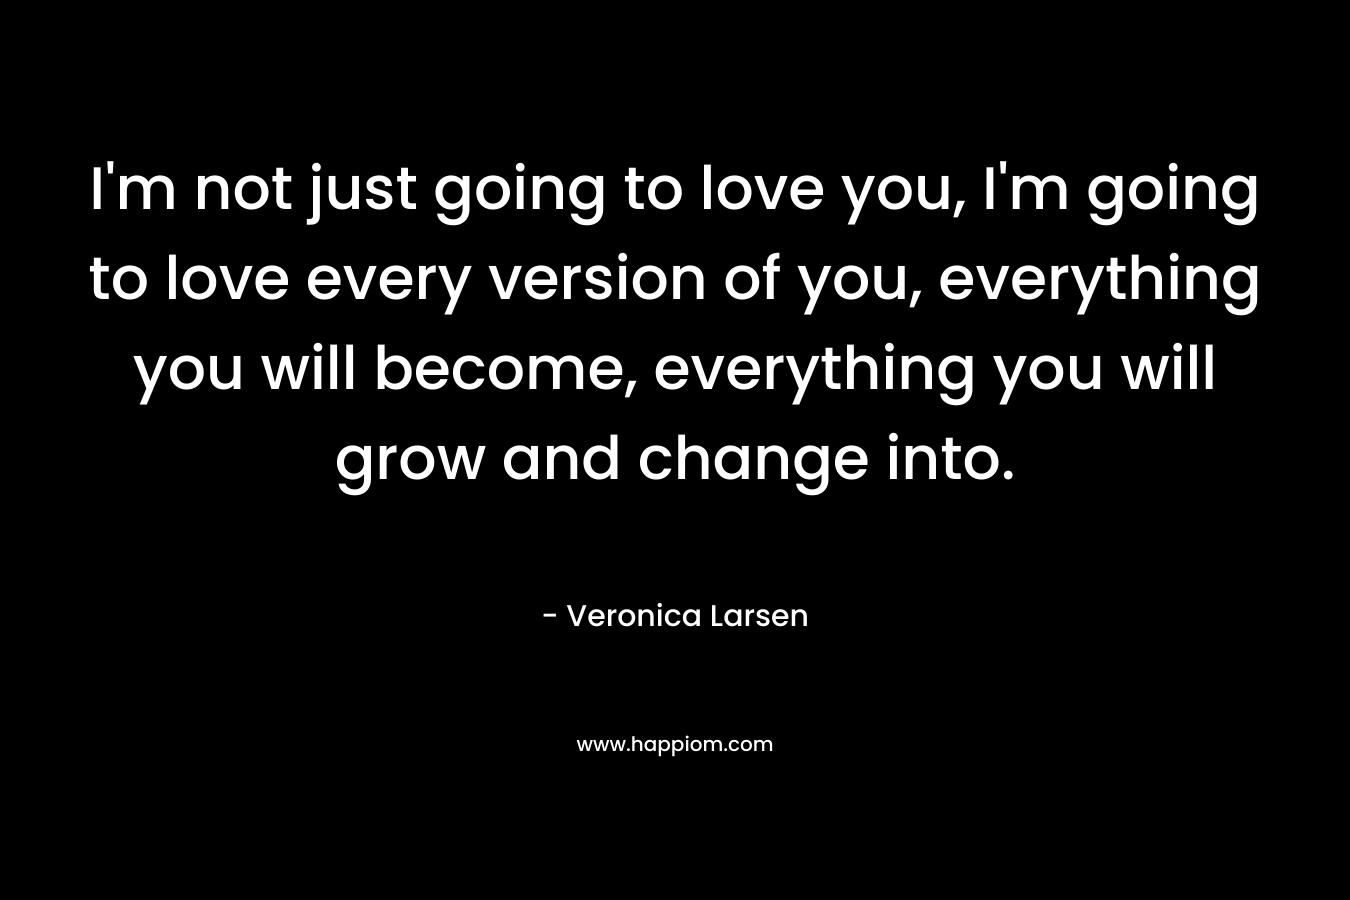 I’m not just going to love you, I’m going to love every version of you, everything you will become, everything you will grow and change into. – Veronica Larsen